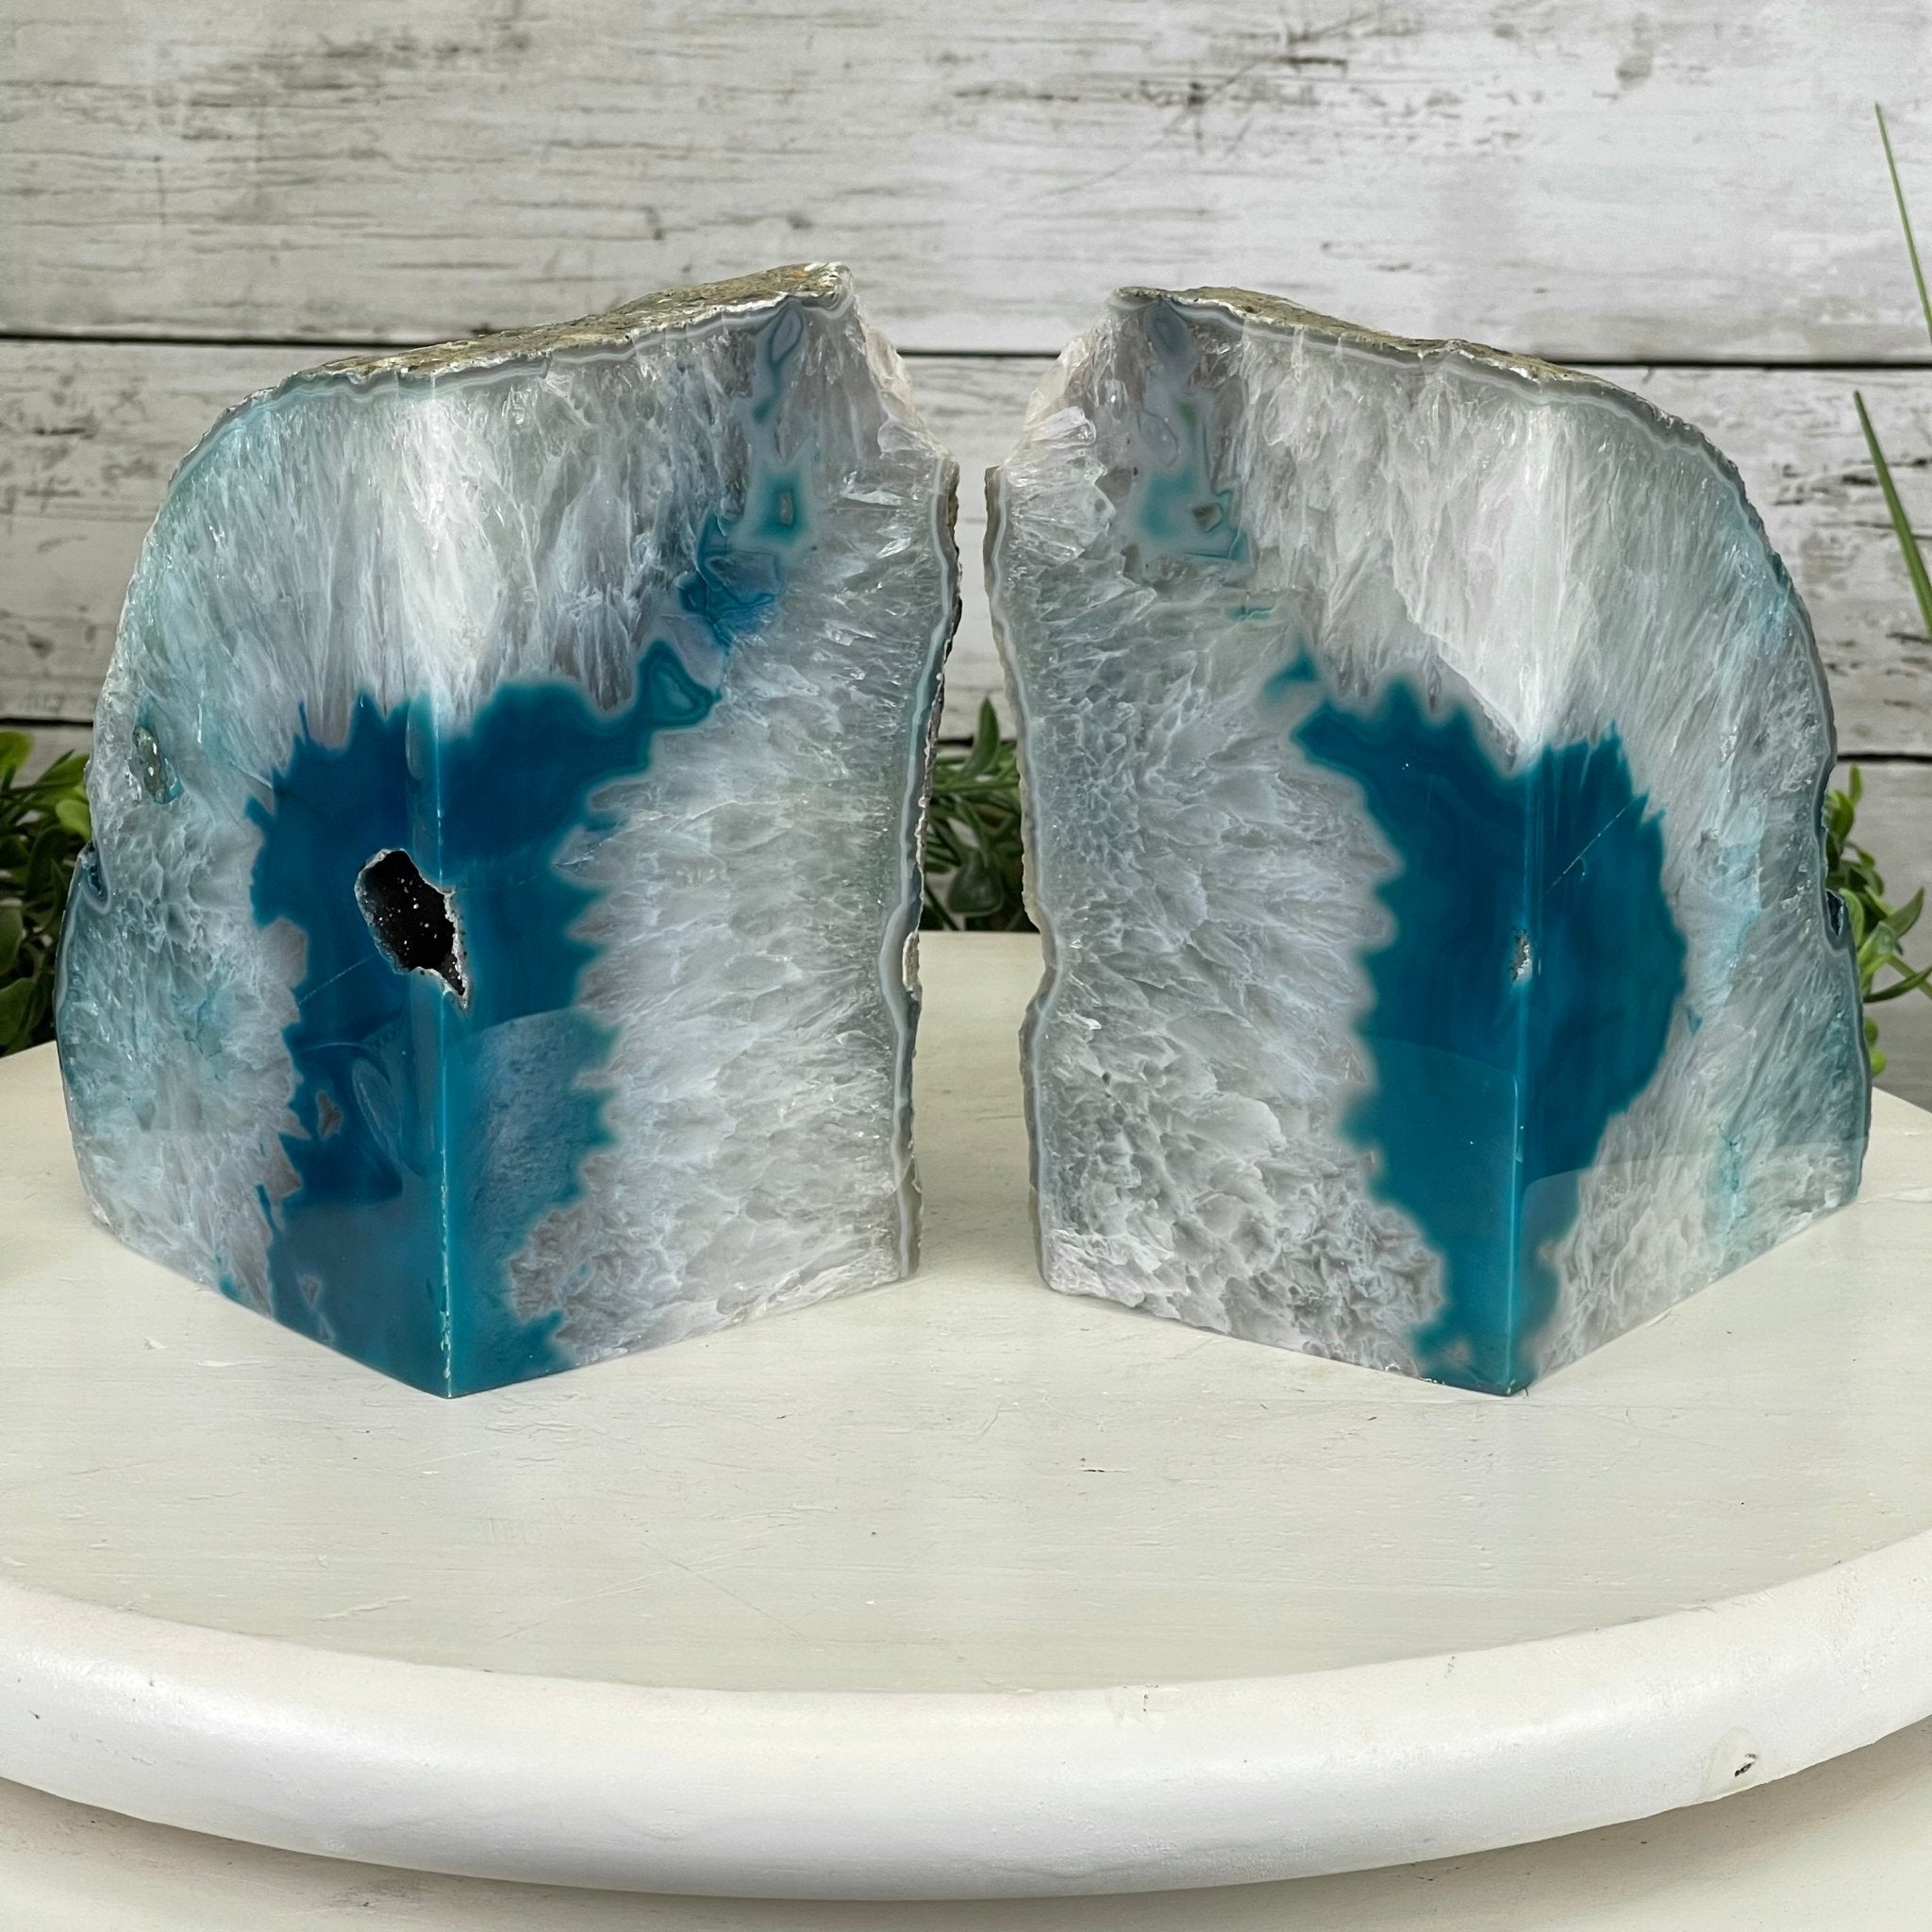 Teal Dyed Brazilian Agate Stone Bookends, 12.3 lbs & 5.6" tall Model #5151TL-023 by Brazil Gems - Brazil GemsBrazil GemsTeal Dyed Brazilian Agate Stone Bookends, 12.3 lbs & 5.6" tall Model #5151TL-023 by Brazil GemsBookends5151TL-023